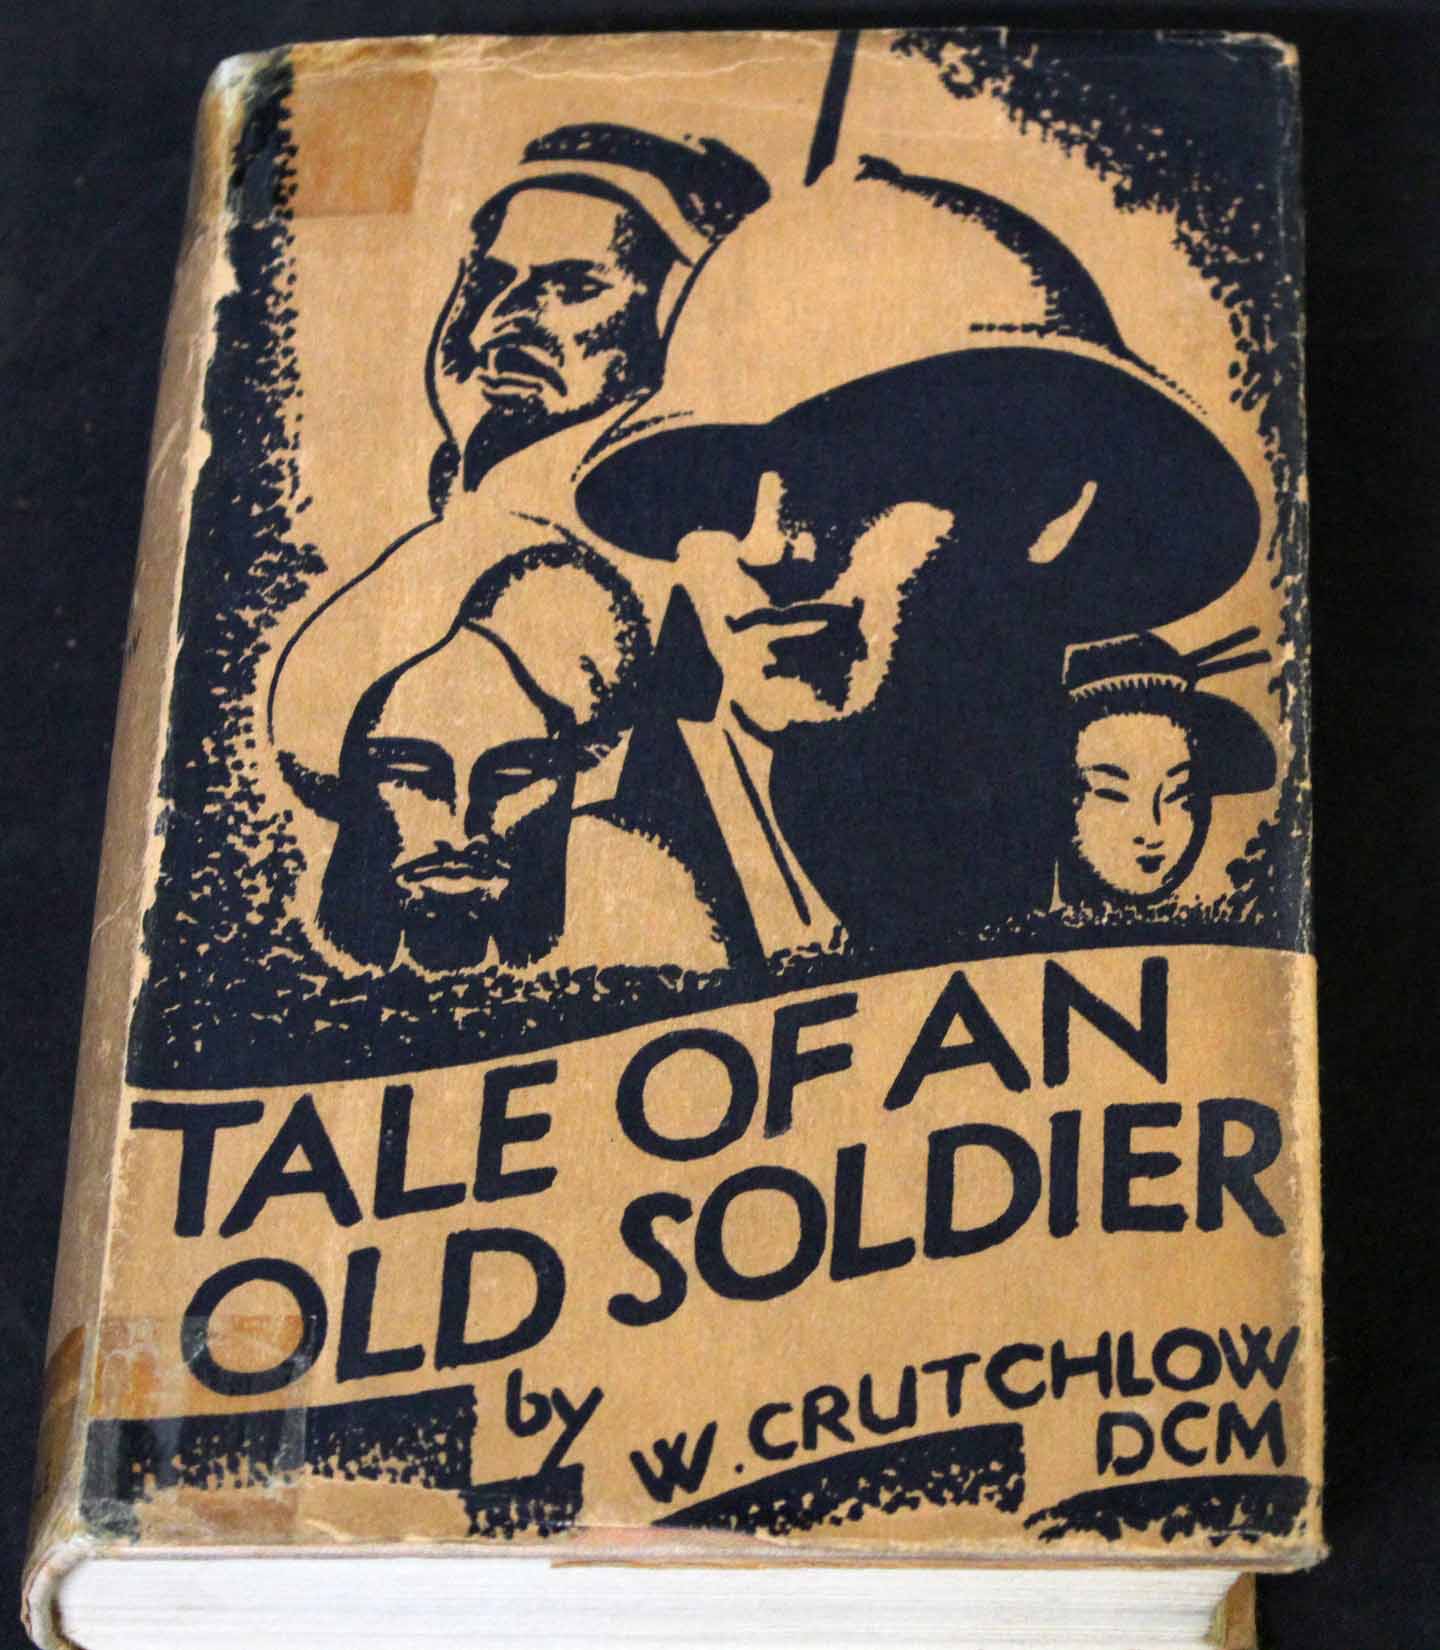 WILLIAM CRUTCHLOW: TALES OF AN OLD SOLDIER, London, Robert Hale, 1937, 1st edition, original